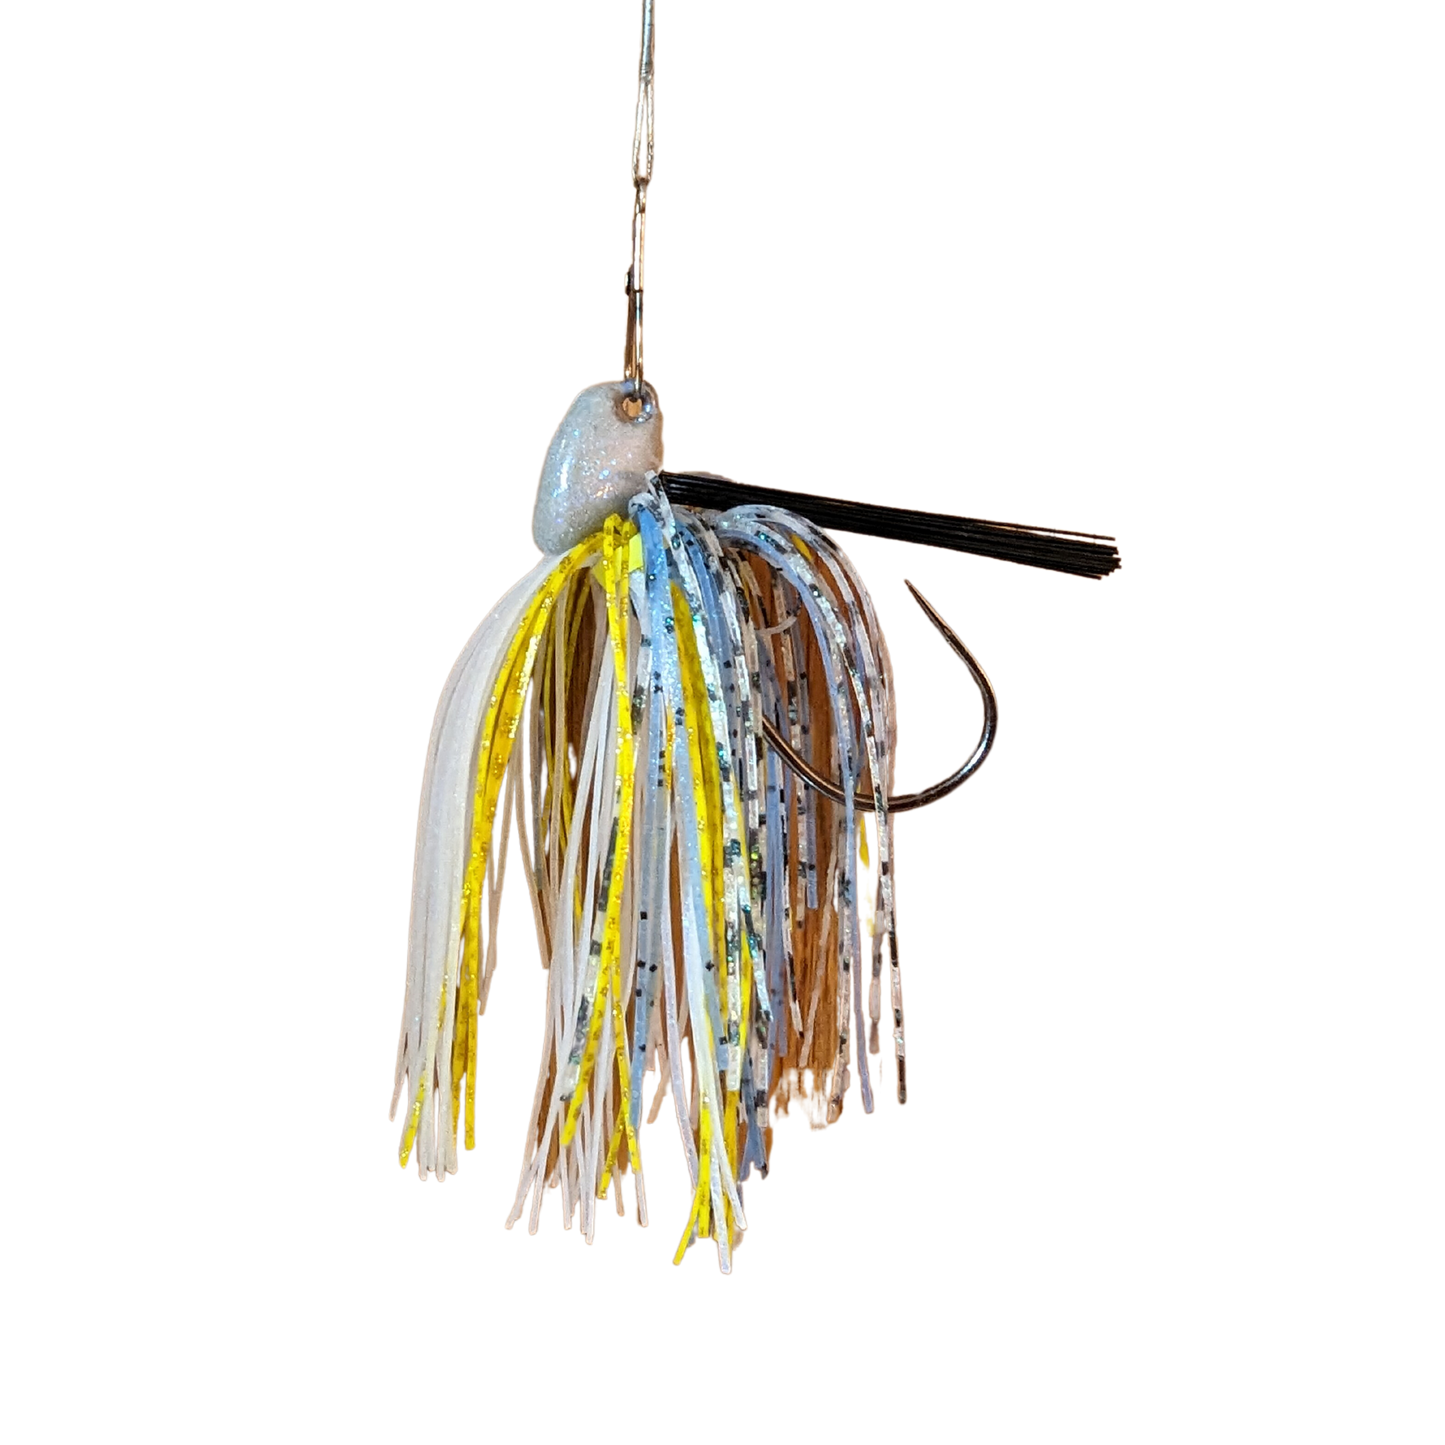 Lead free blue yellow and white shiny weedless jig used for bass fishing